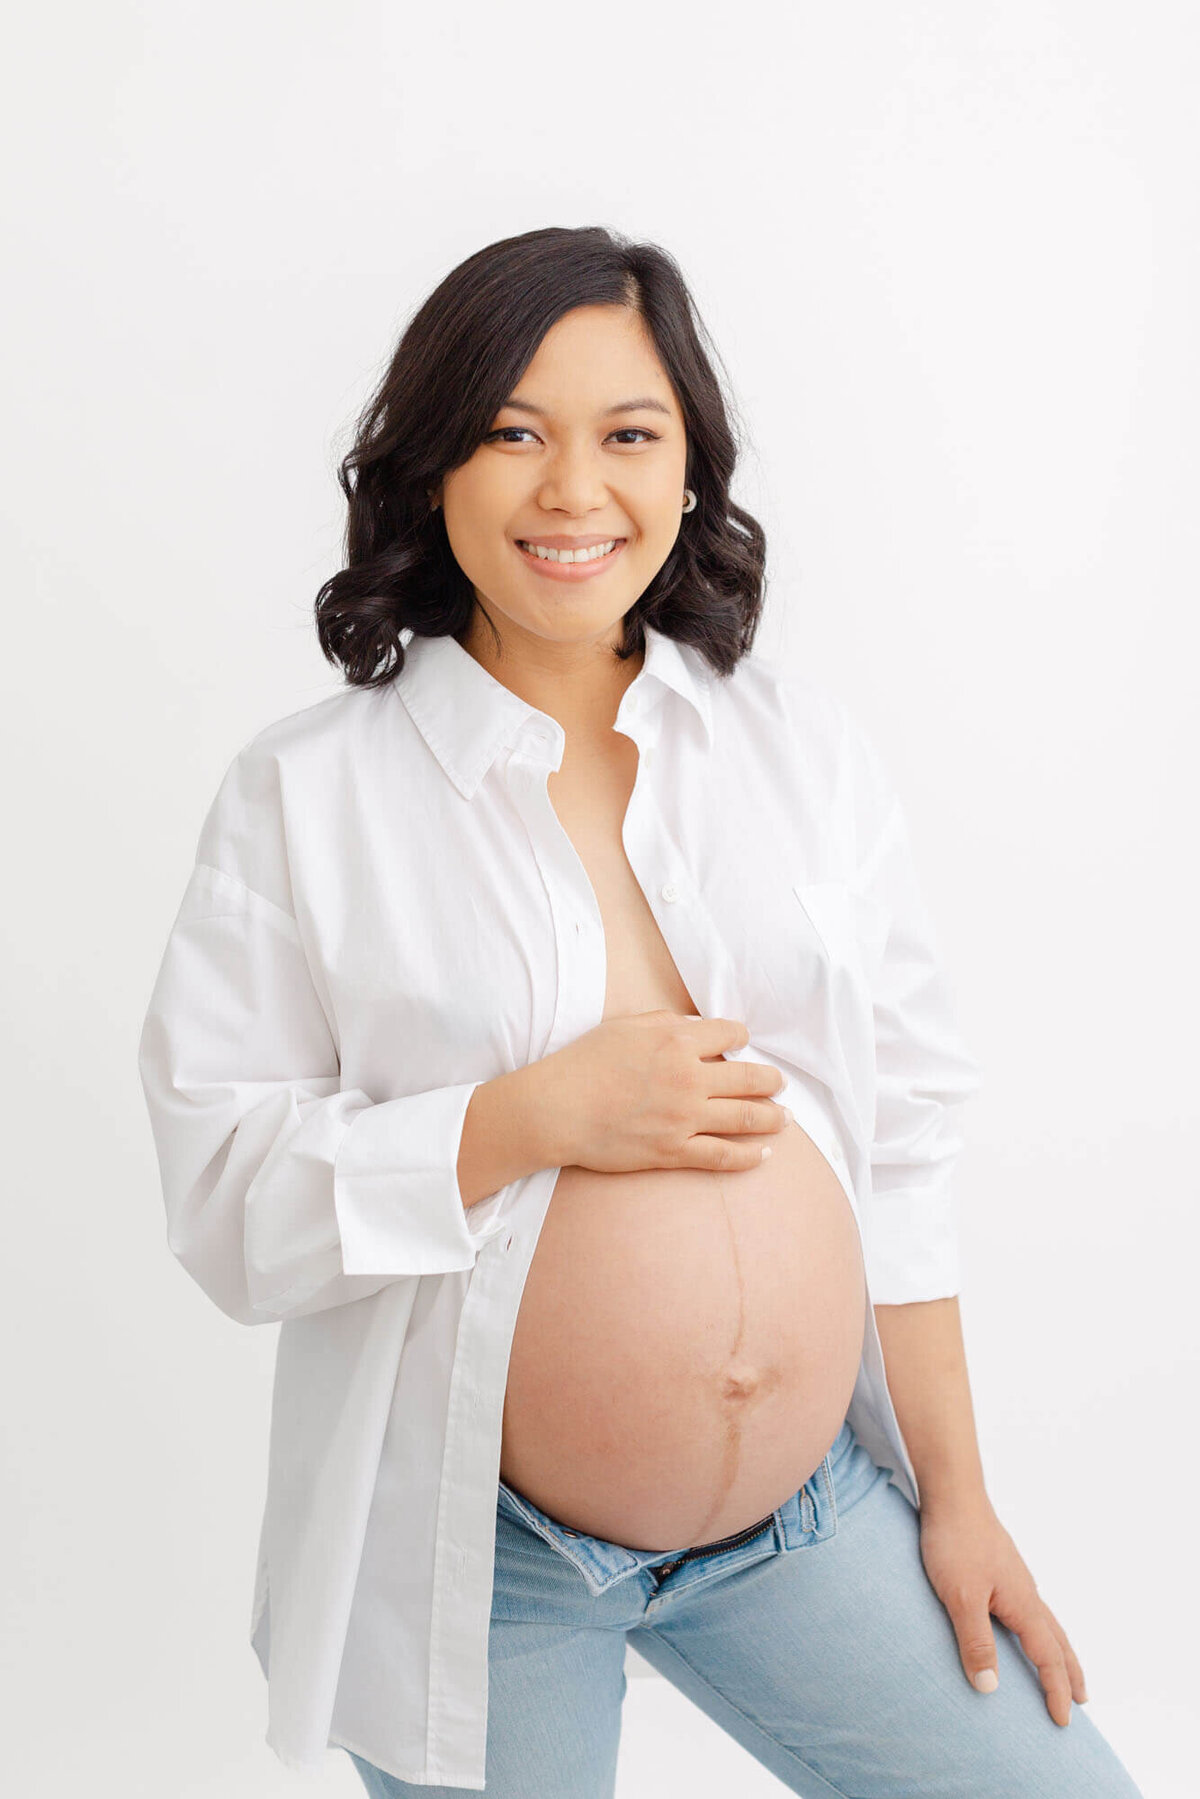 Mama-to-be with shoulder length black hair in loose curls. She is wearing a white buttoned down shirt that is open and showing off her baby bump. She has light colored jeans on that have the buttons open at the top.